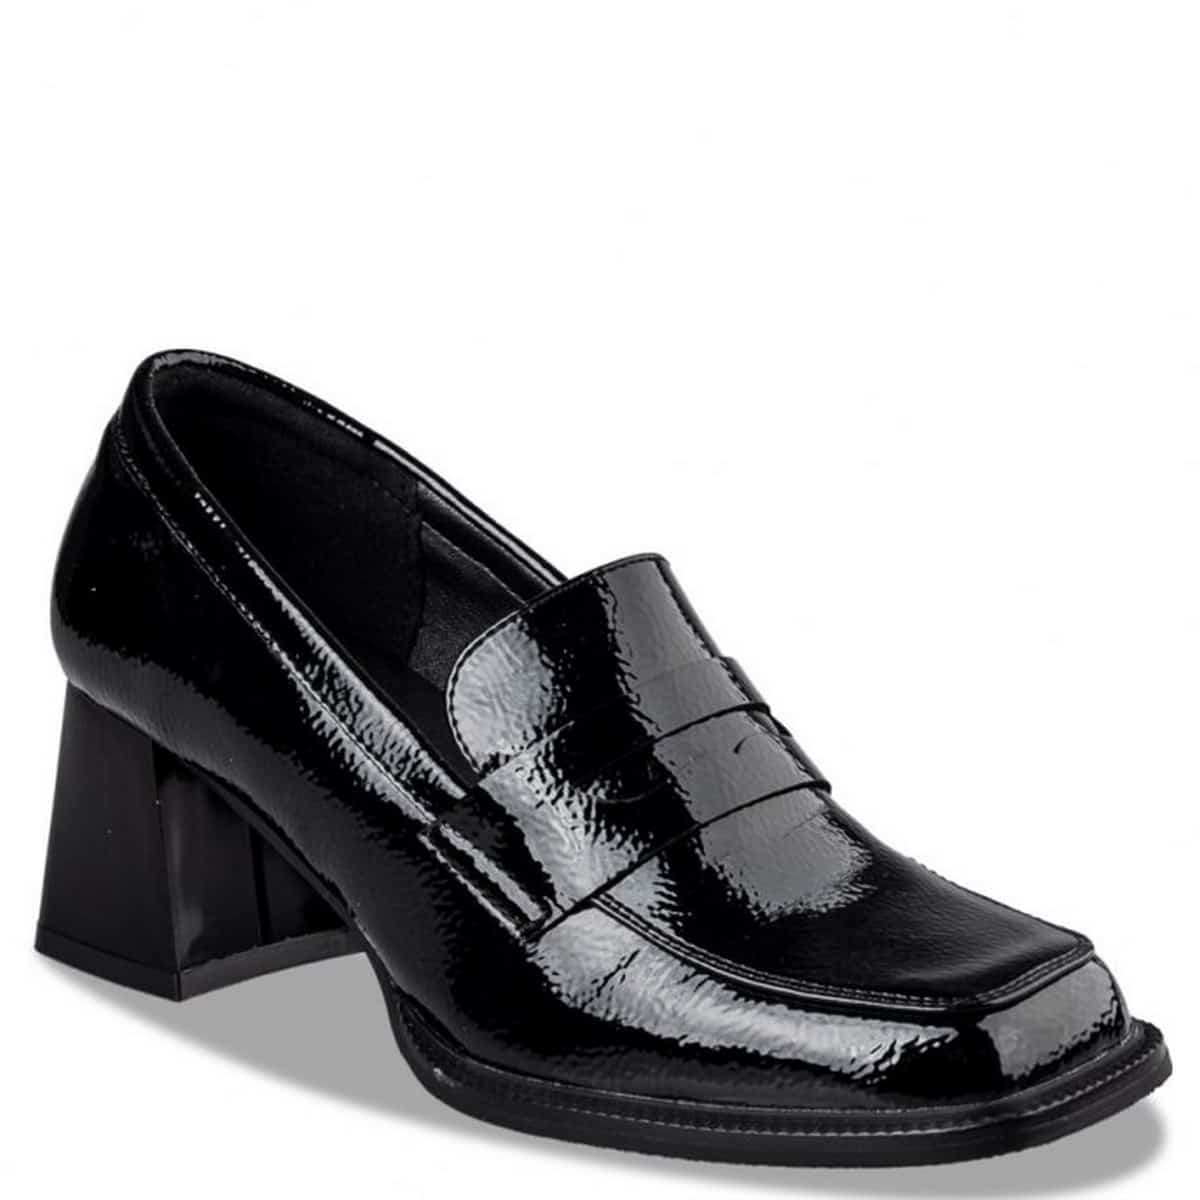 SHINY LOAFERS WITH THICK HEEL V57-18187-34 ENVIE SHOES PATENT BLACK